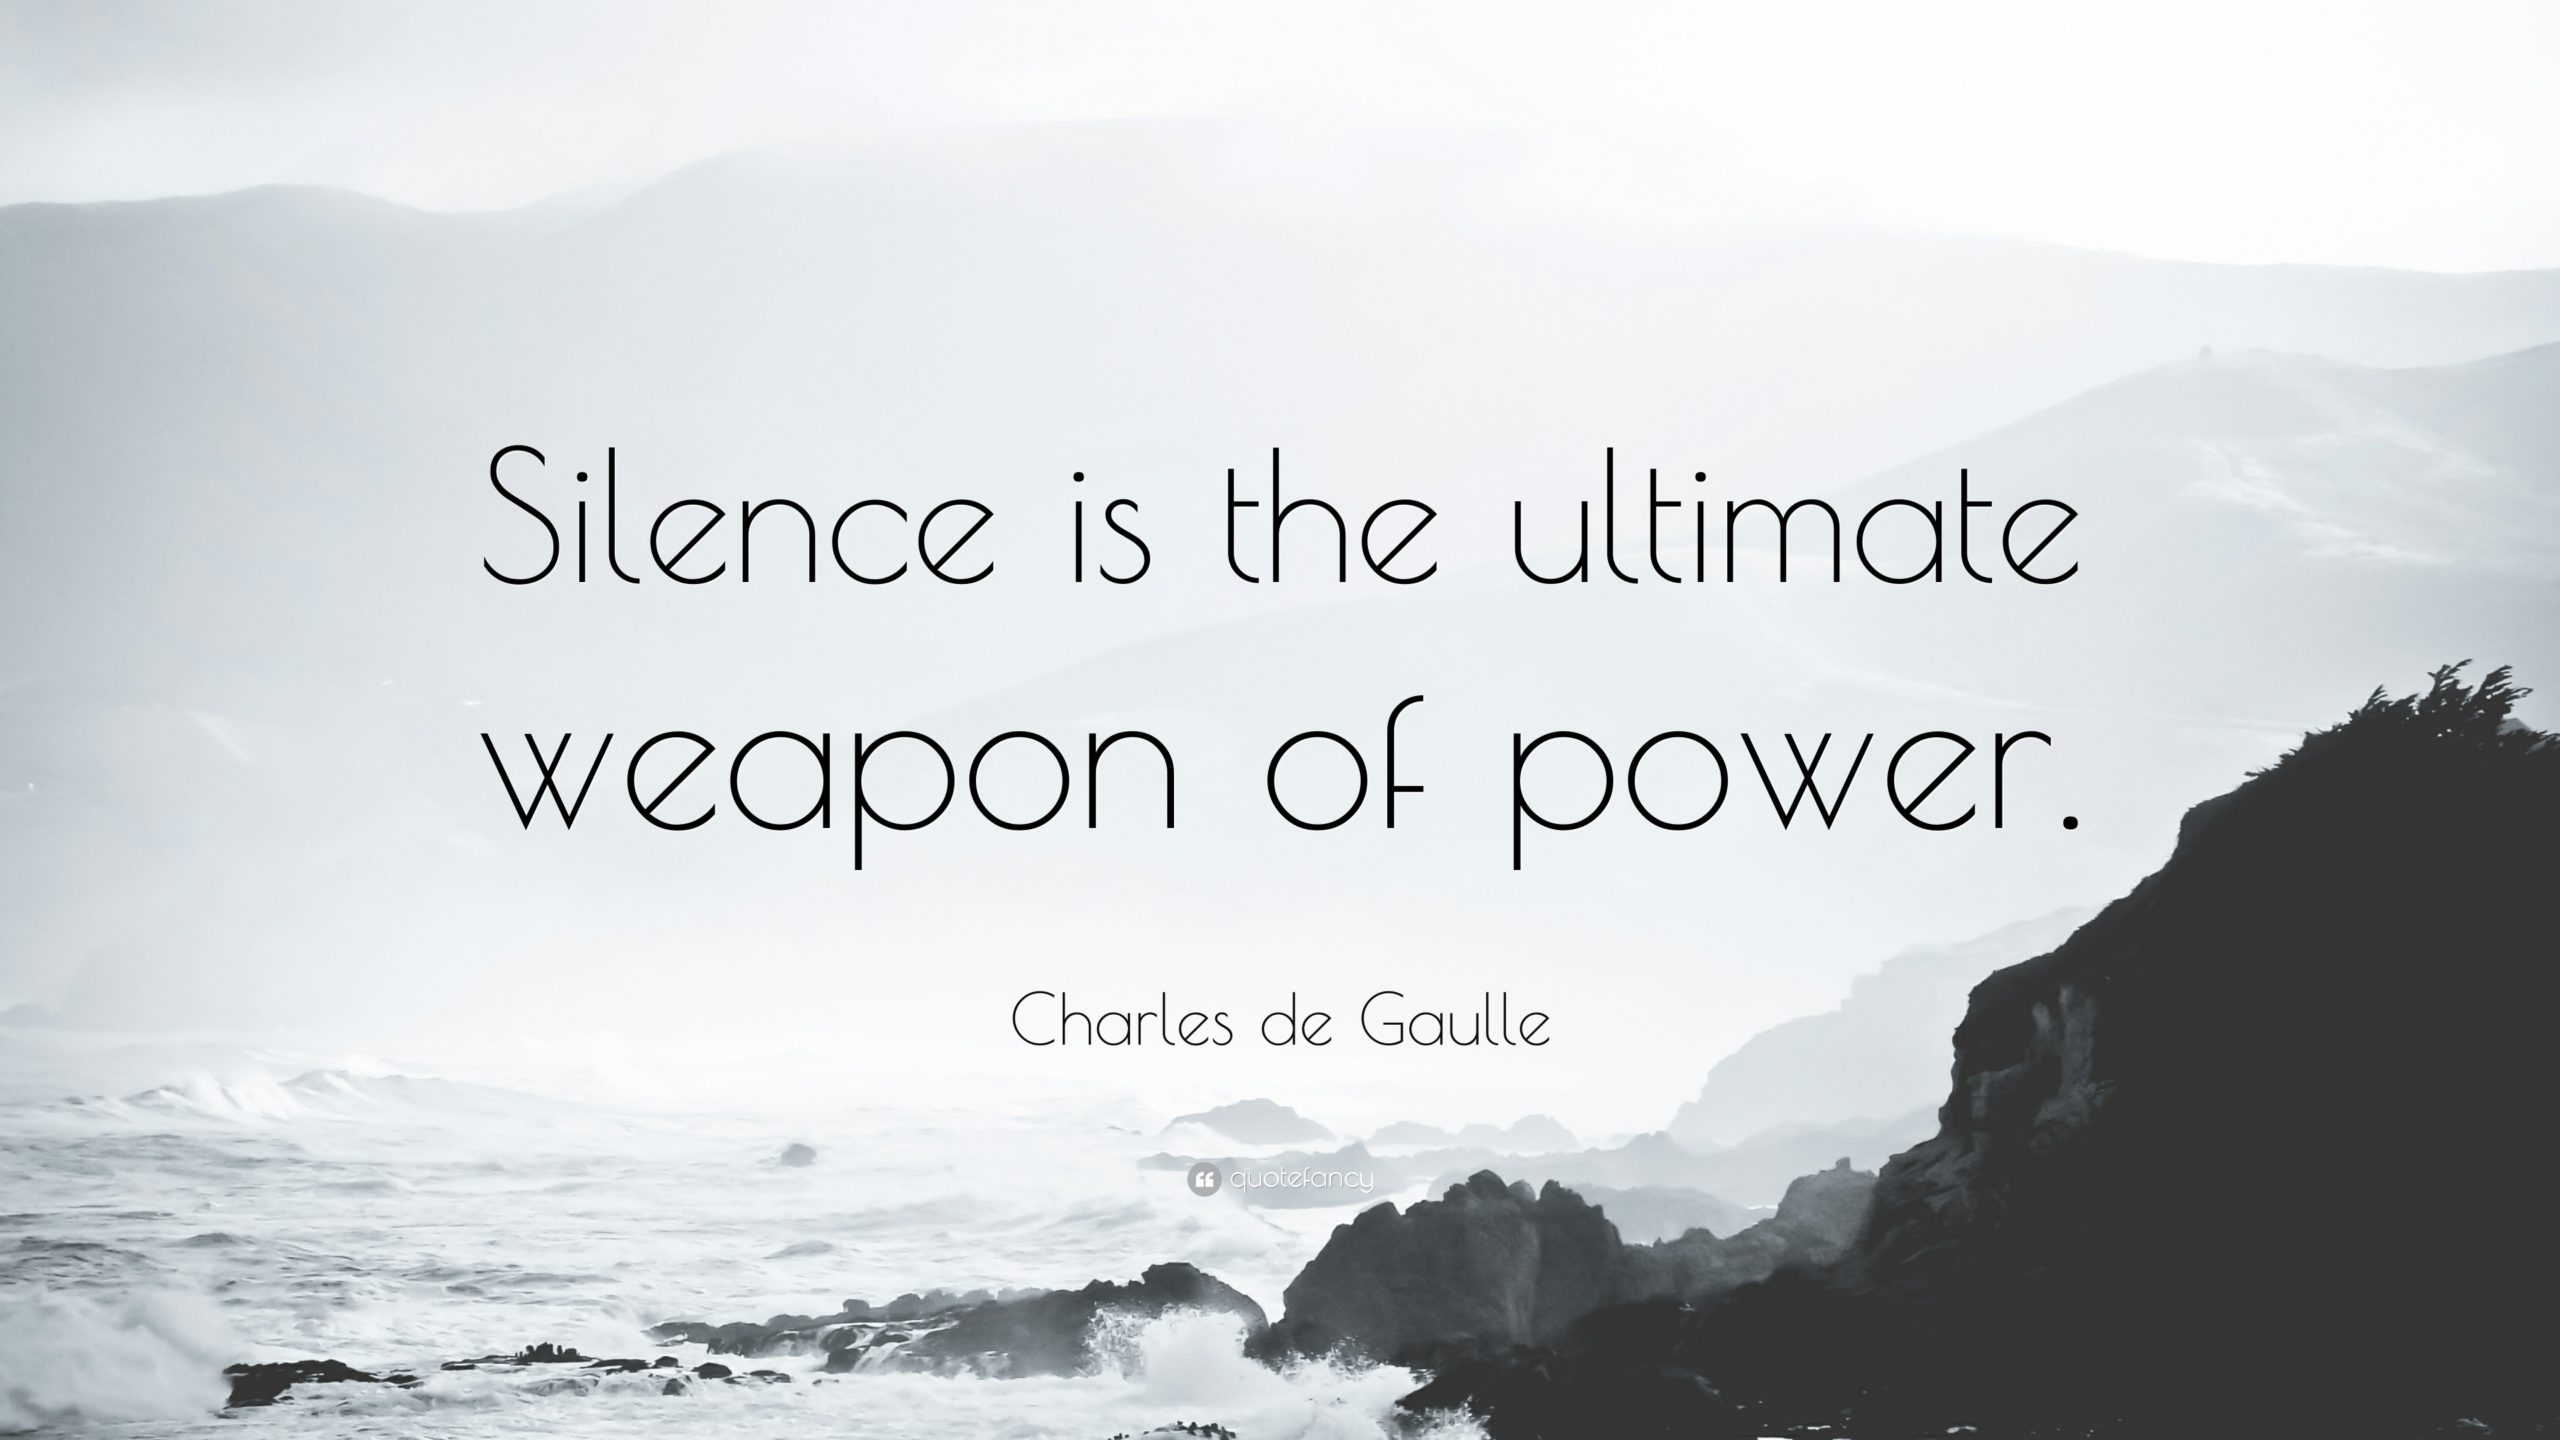 Silence is the ultimate
weapon OF power.

Charles de Gaulle